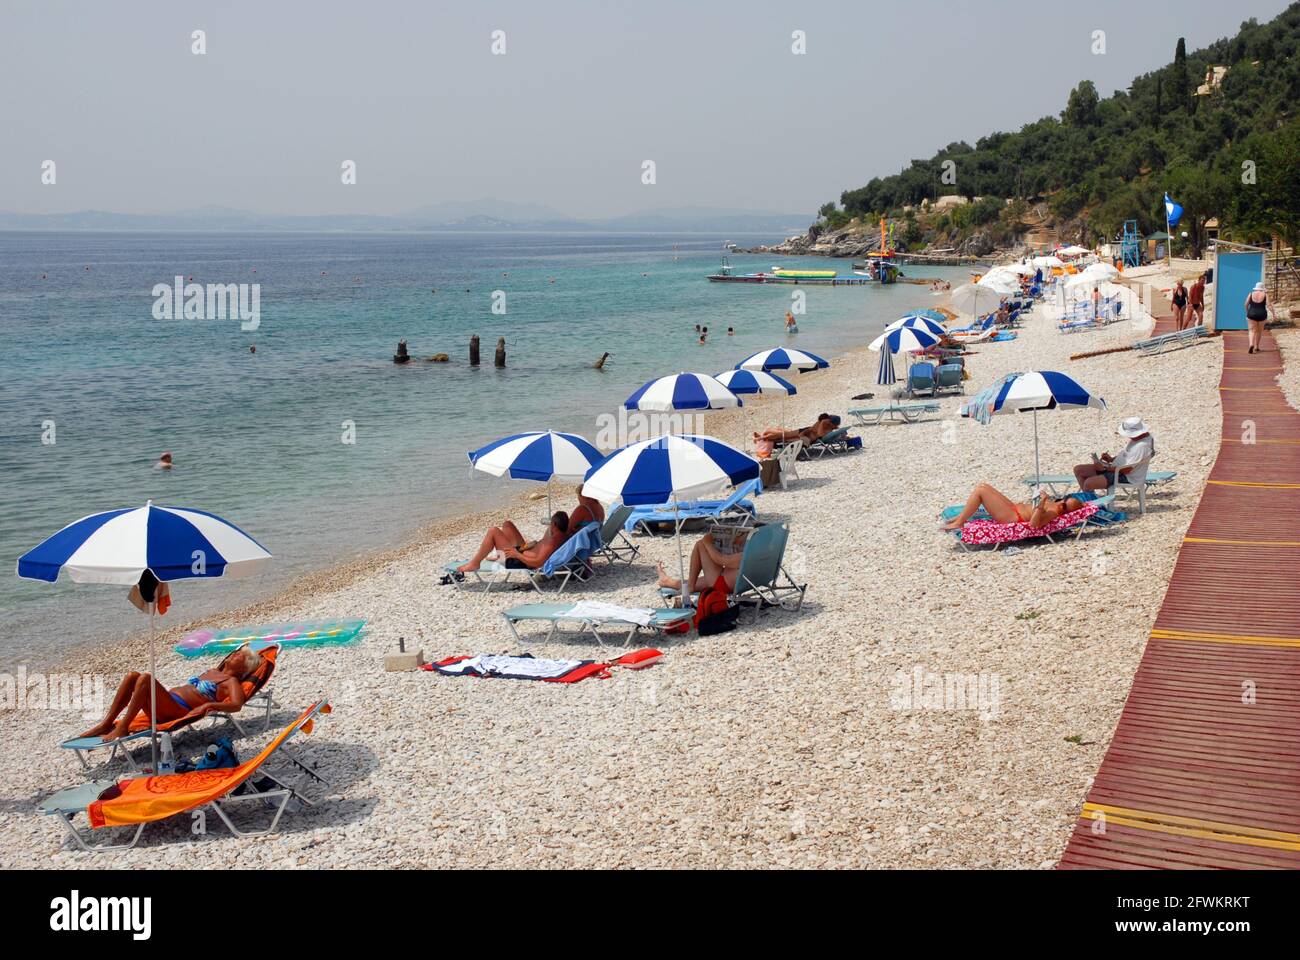 People at leisure, enjoying the hot sunshine, Nissaki Beach, which is provided with purpose-made wooden walkways over the shingle, Corfu, Greece Stock Photo